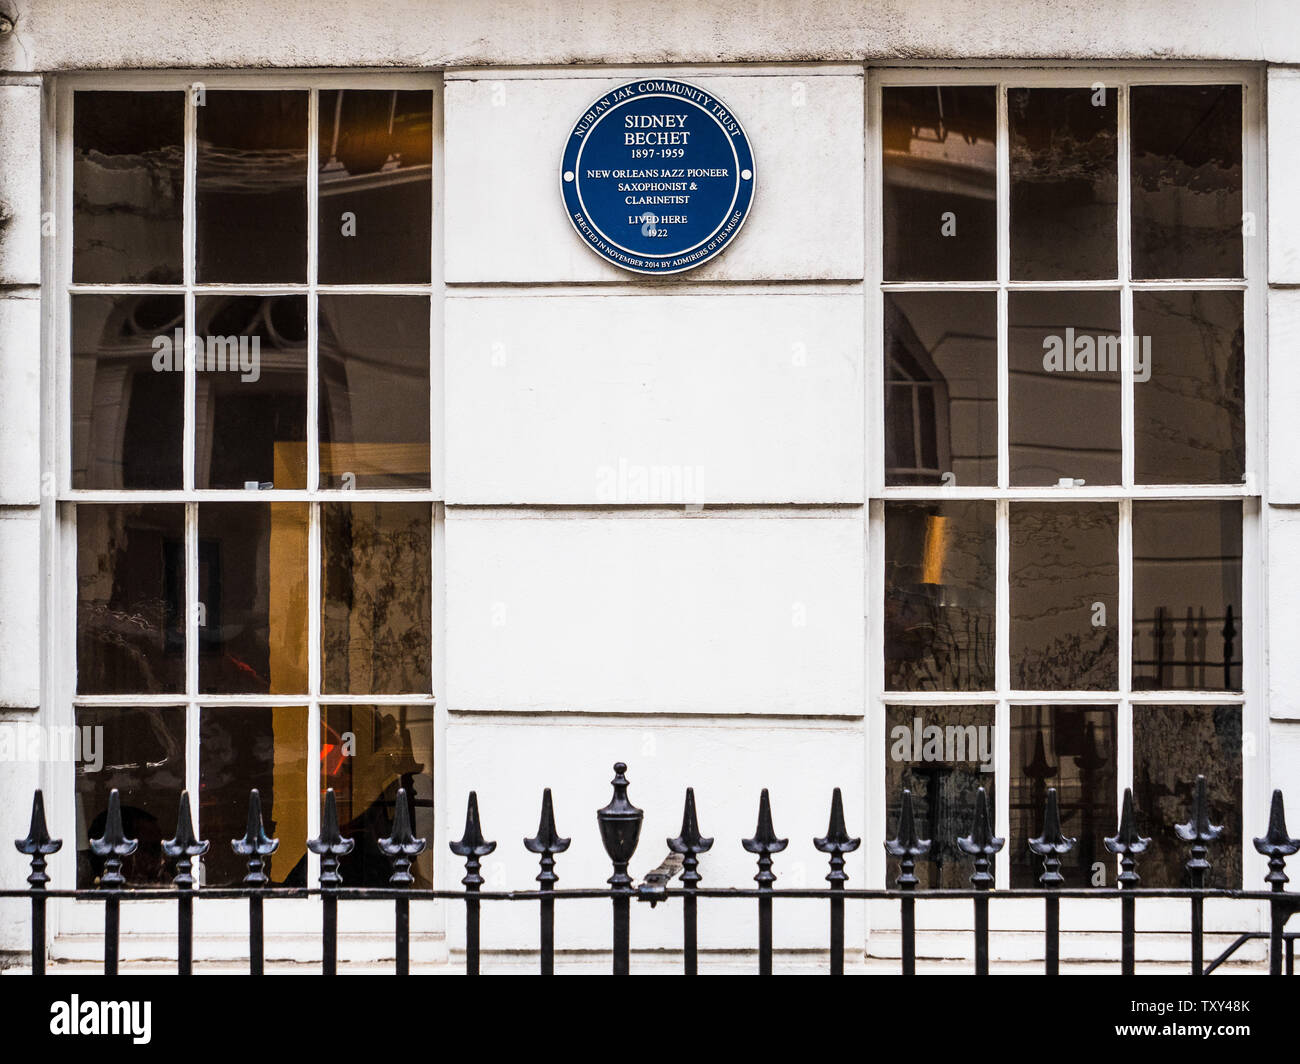 Sidney Bechet Jazz Saxophonist and Claranetist, 1897-1959, lived at this house 27 Conway Street London. Nubian Jak Community Trust Blue Plaque Stock Photo